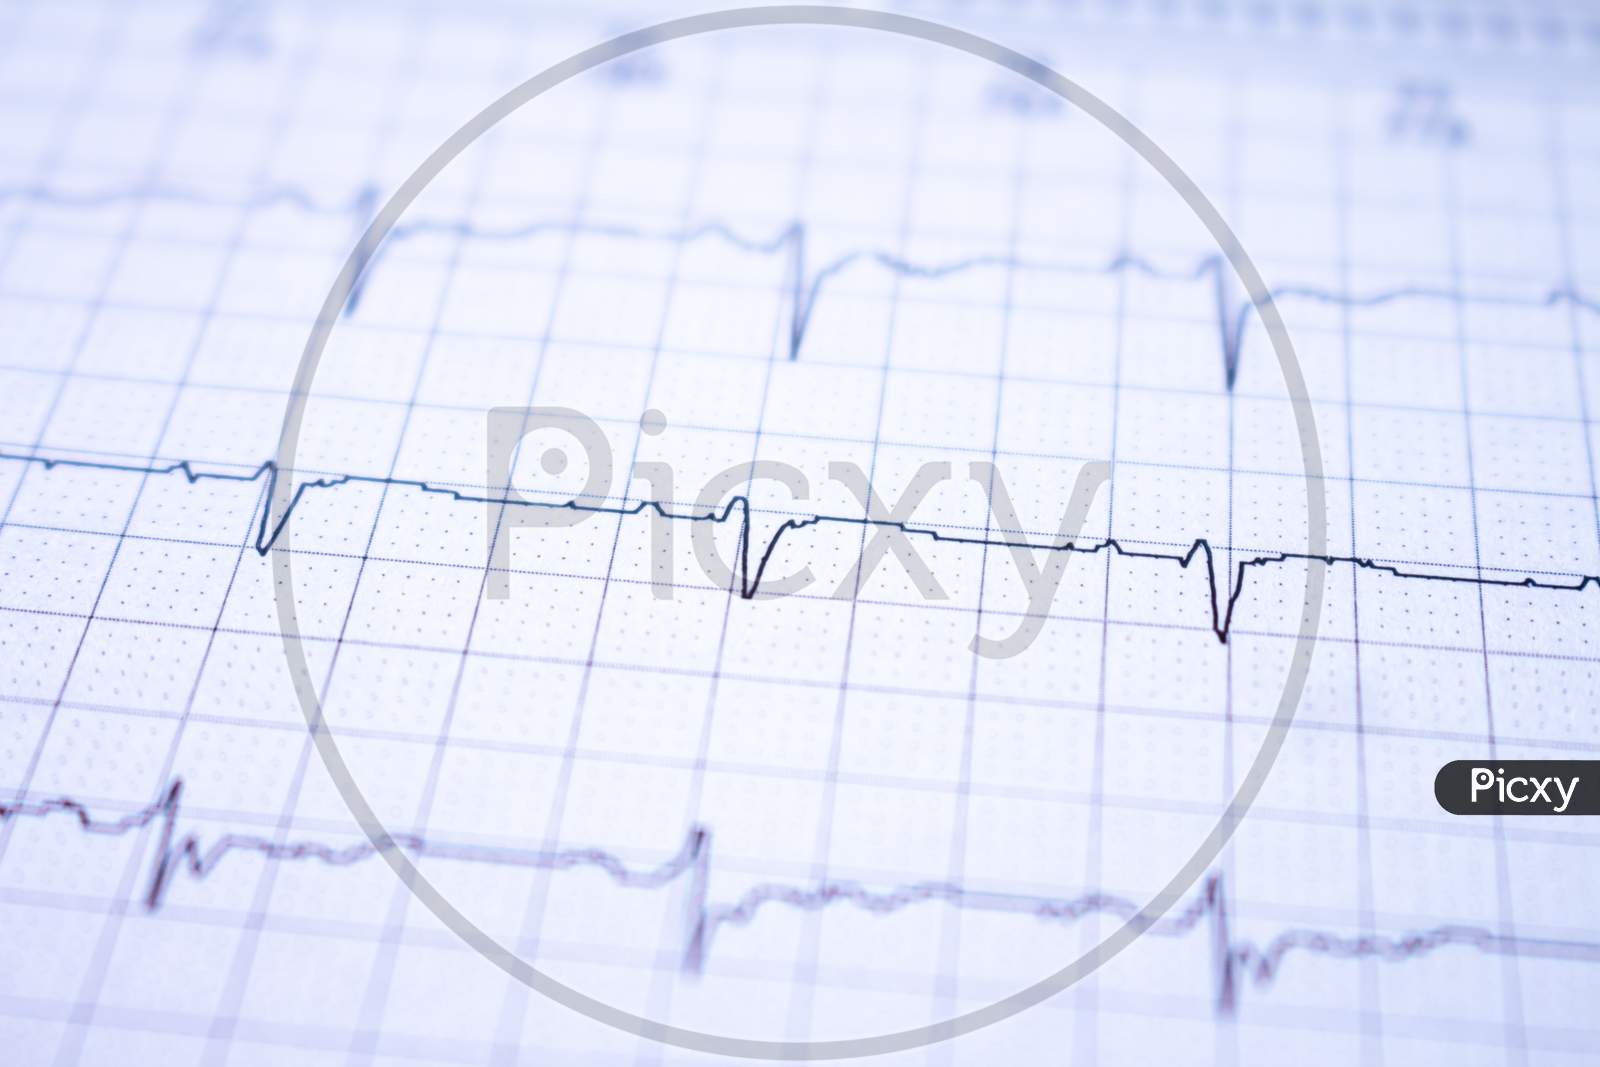 Heart Waves Recorded On Paper Called An Electrocardiogram. Study Of The Heart.